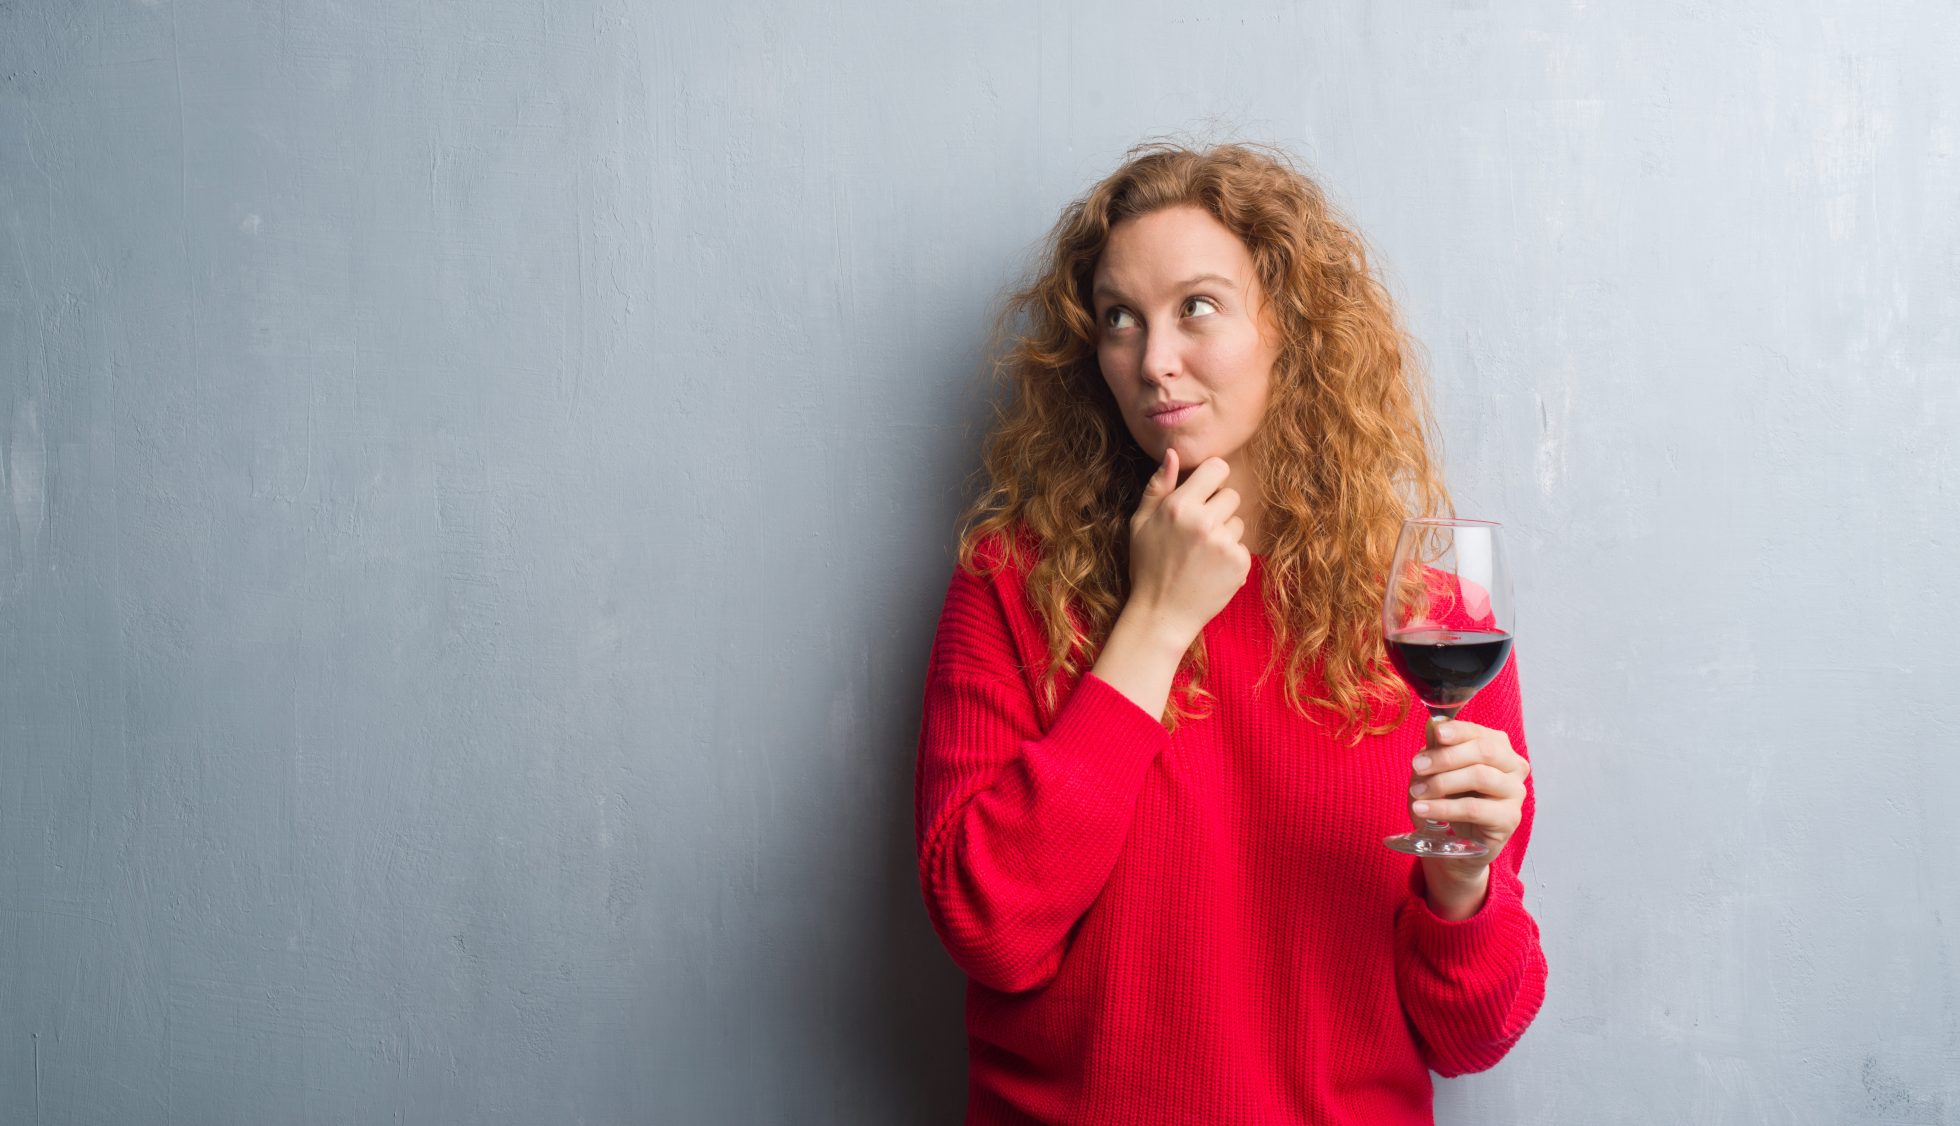 Woman thinking about rosacea triggers while drinking red wine